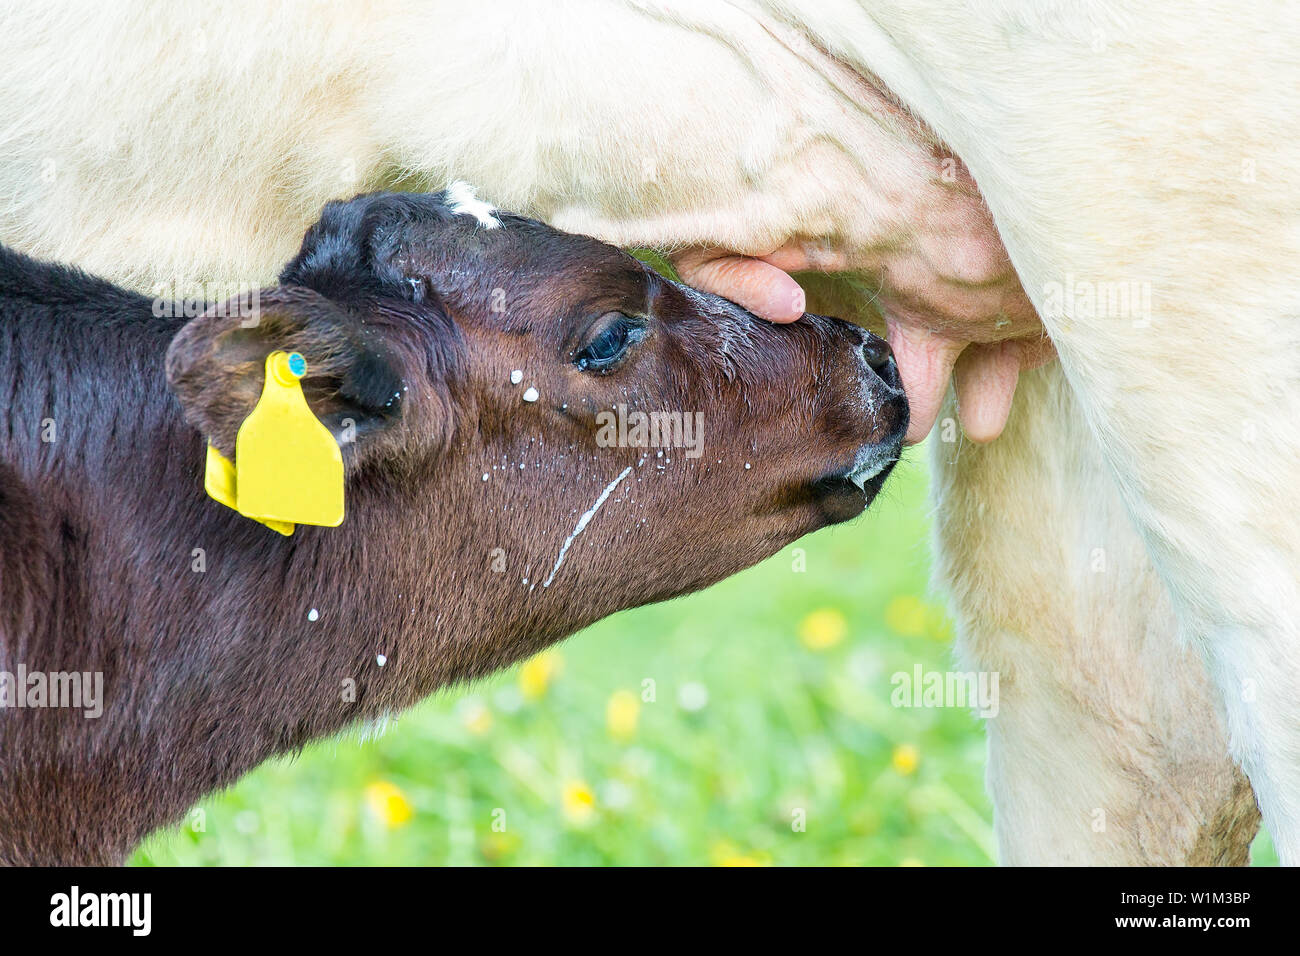 Newborn calf drinking milk at udder from mother cow Stock Photo